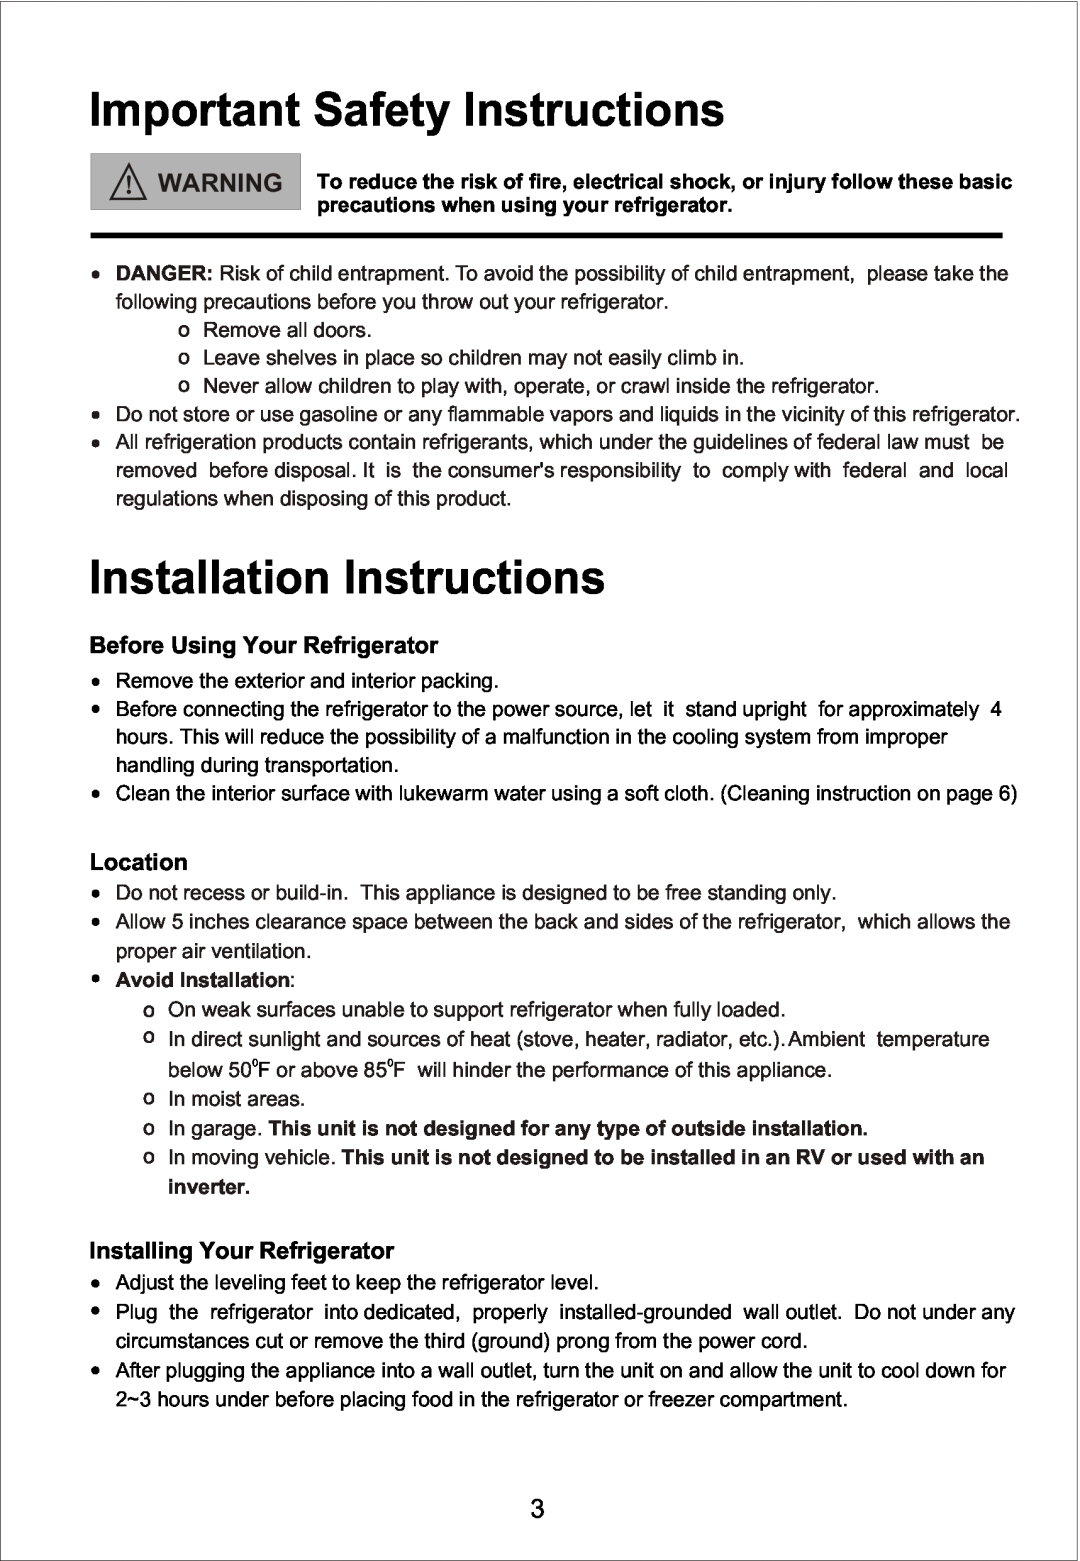 Magic Chef MCBR510W Important Safety Instructions, Installation Instructions, Before Using Your Refrigerator, Location 